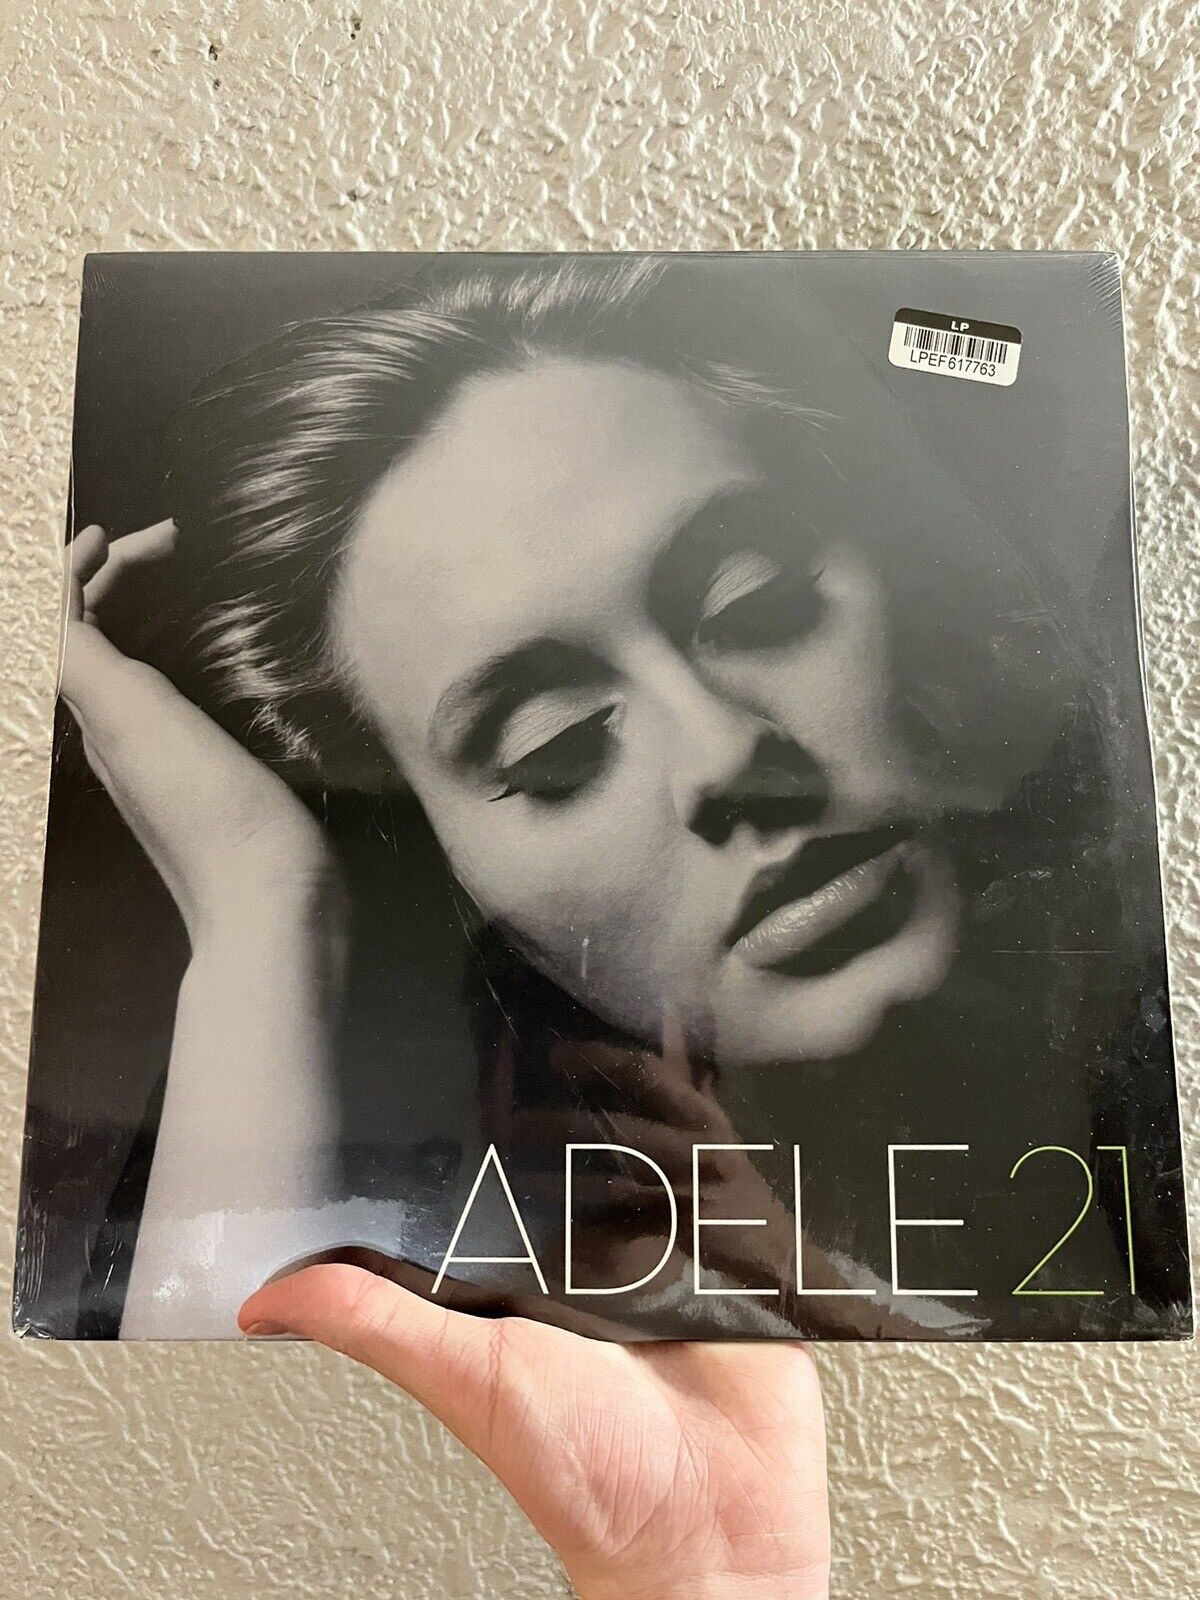 Adele - 21 Vinyl Record: Premium Quality, Soulful Melodies, Limited Edition  - Elevate Your Music Experience with Iconic Adele Hits